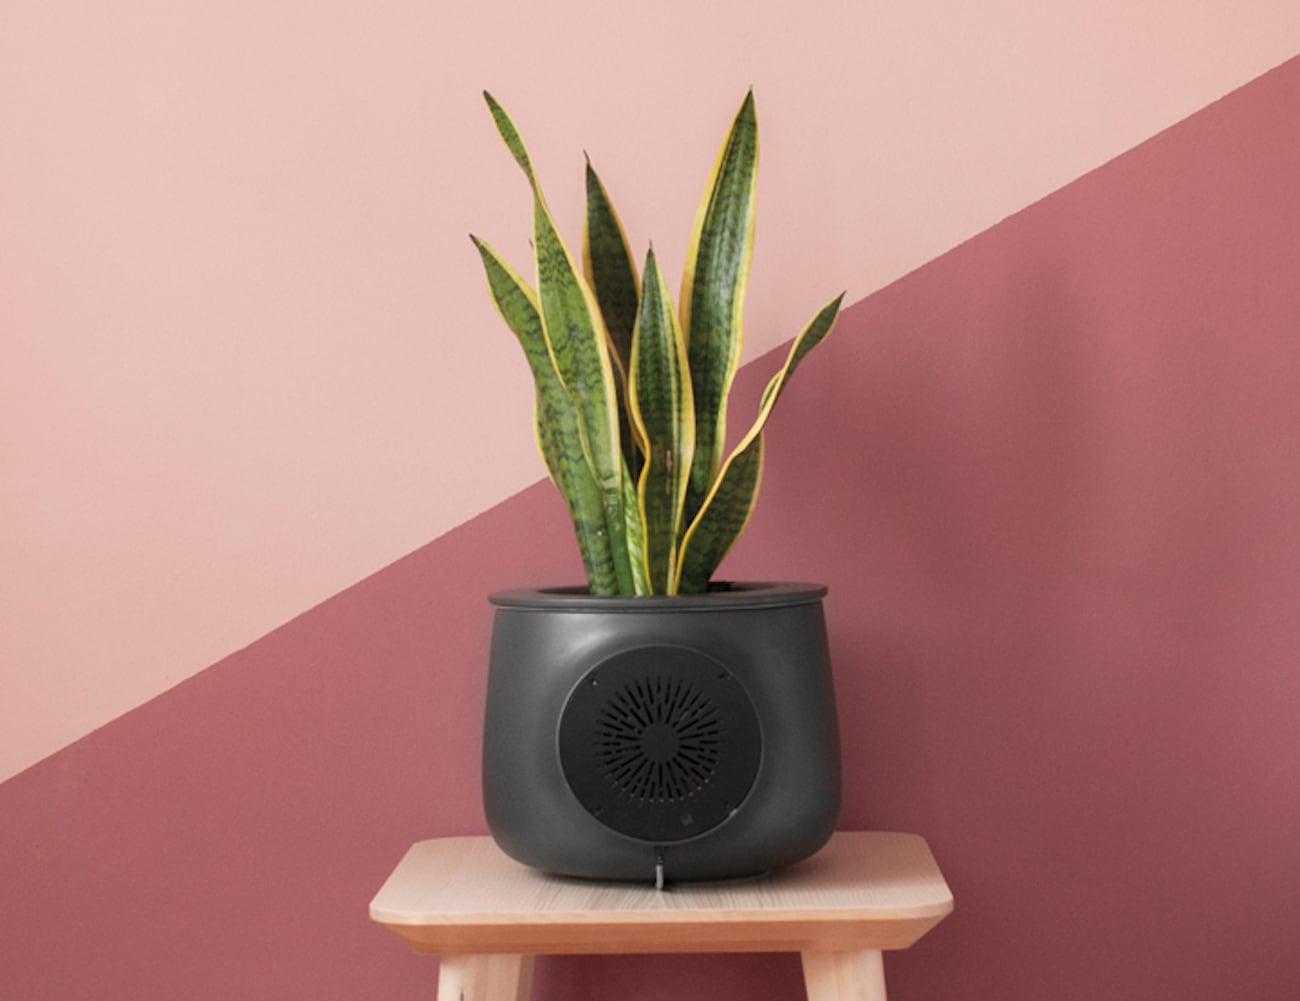 Clairy – The Most Amazing Natural Air Purifier